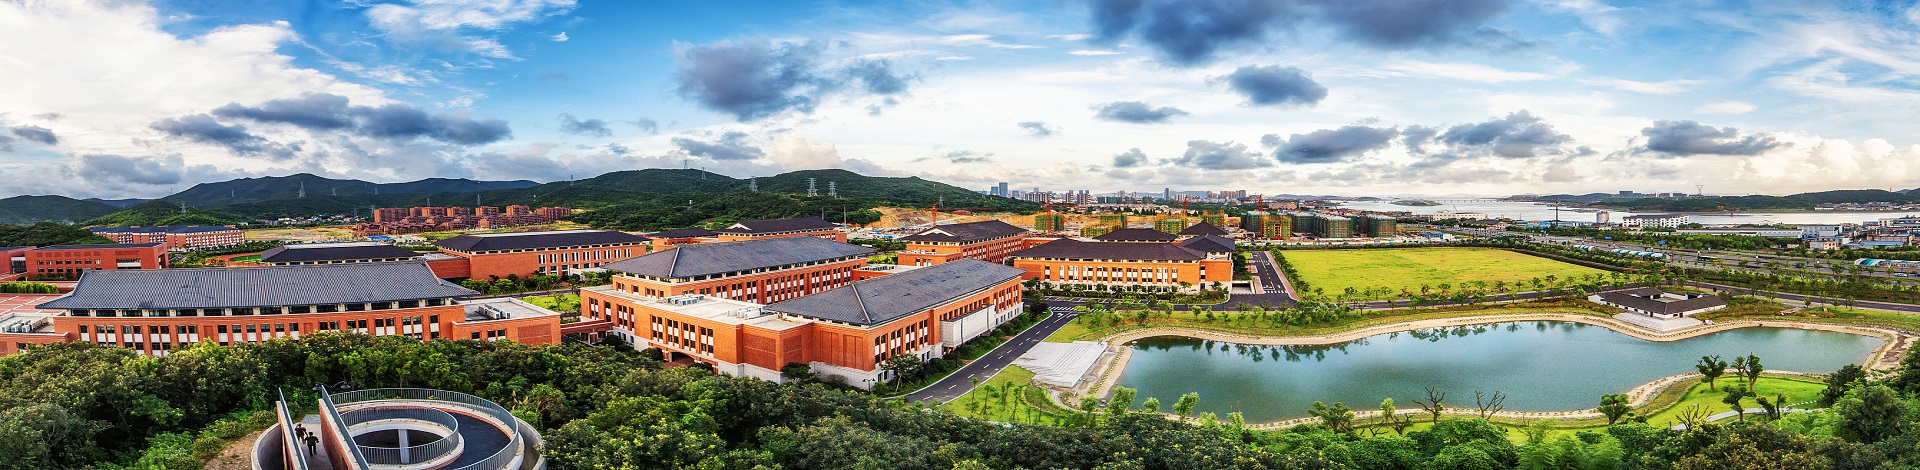 Zhejiang University seeks to realize UN’s sustainable goals